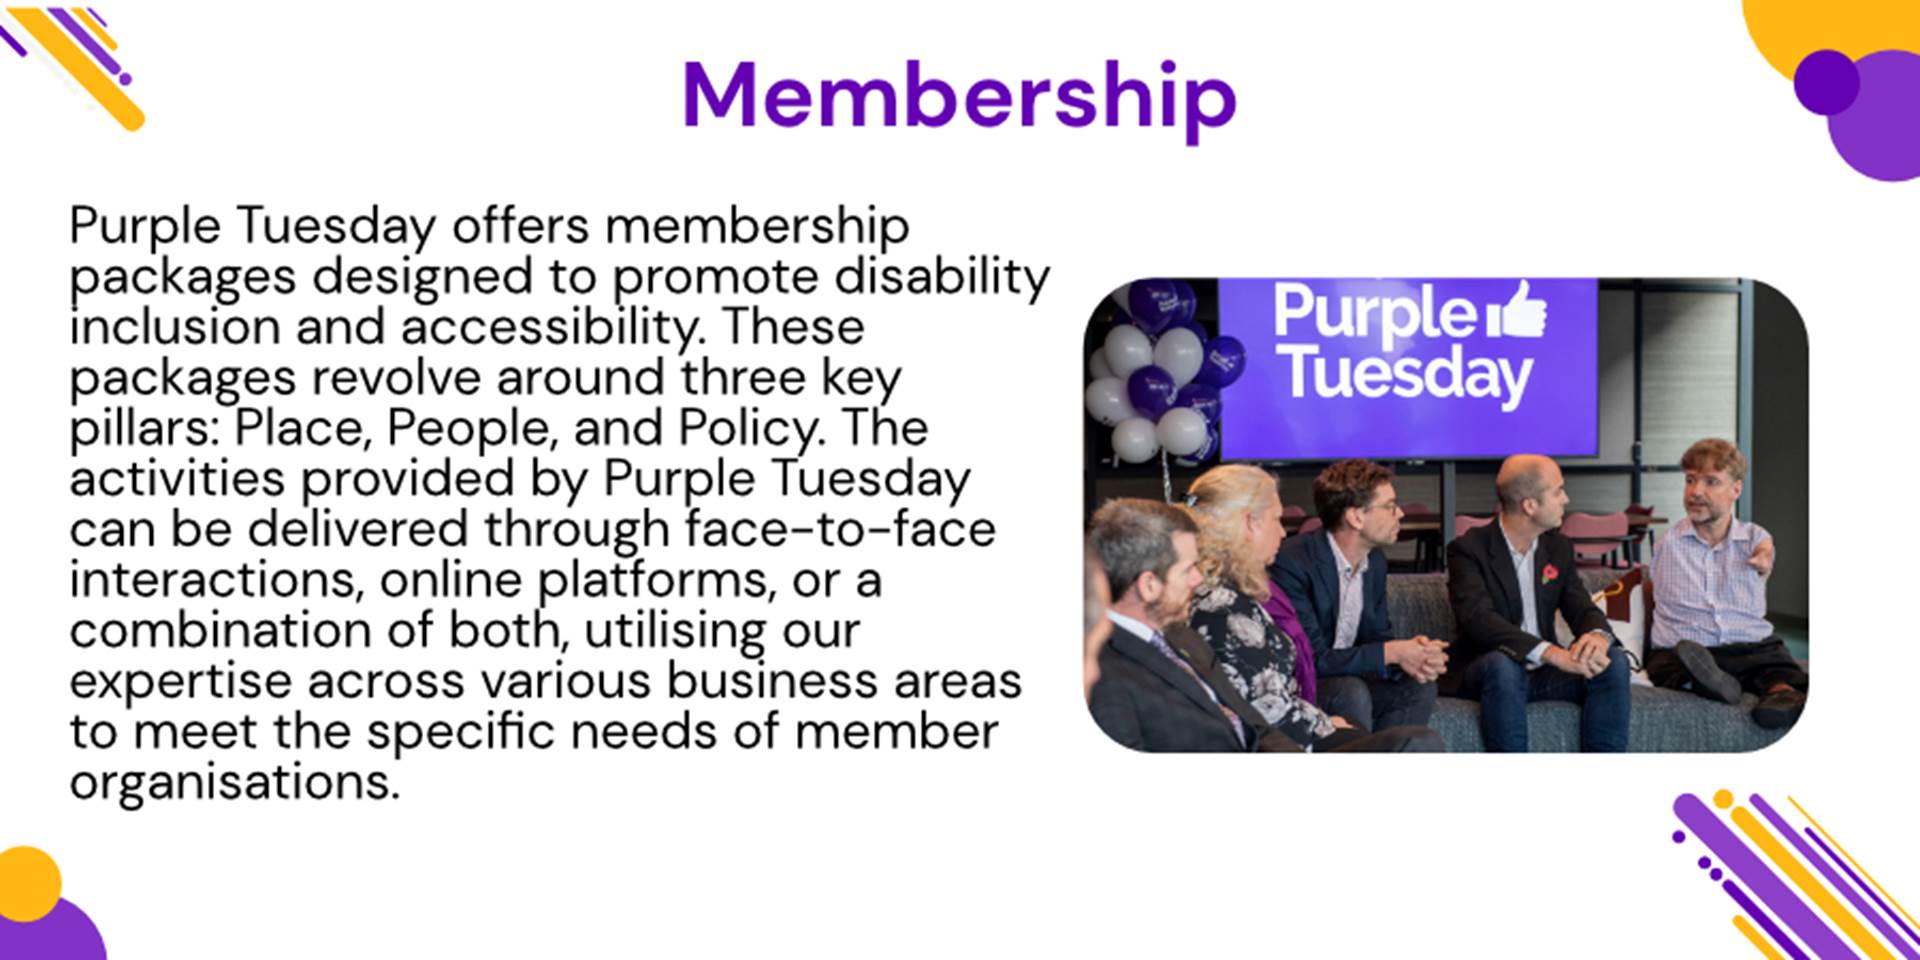 A picture describing the benefits of being a Purple Tuesday member